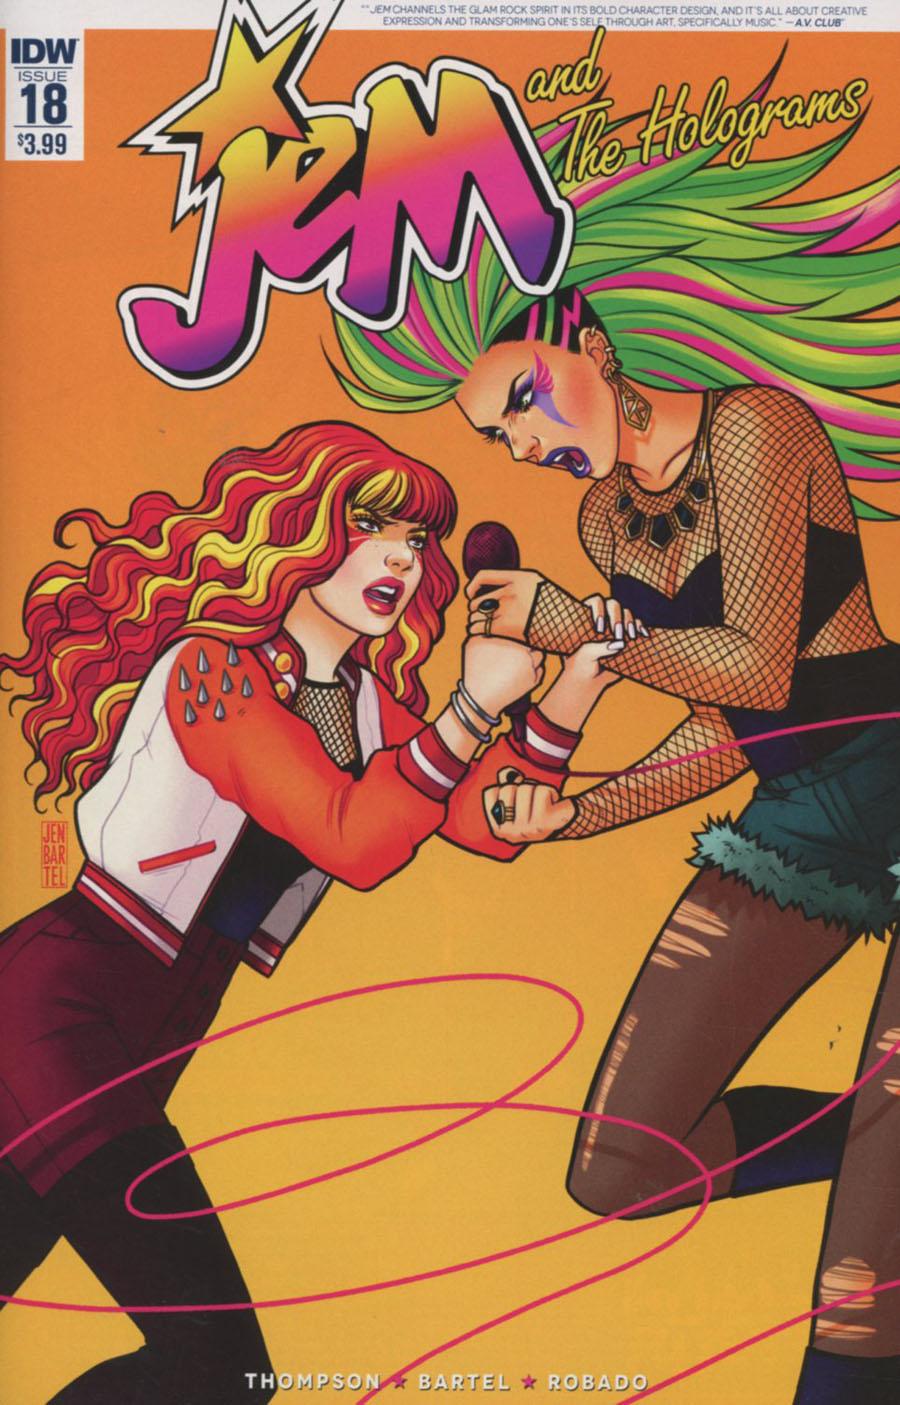 Jem And The Holograms Vol. 1 #18